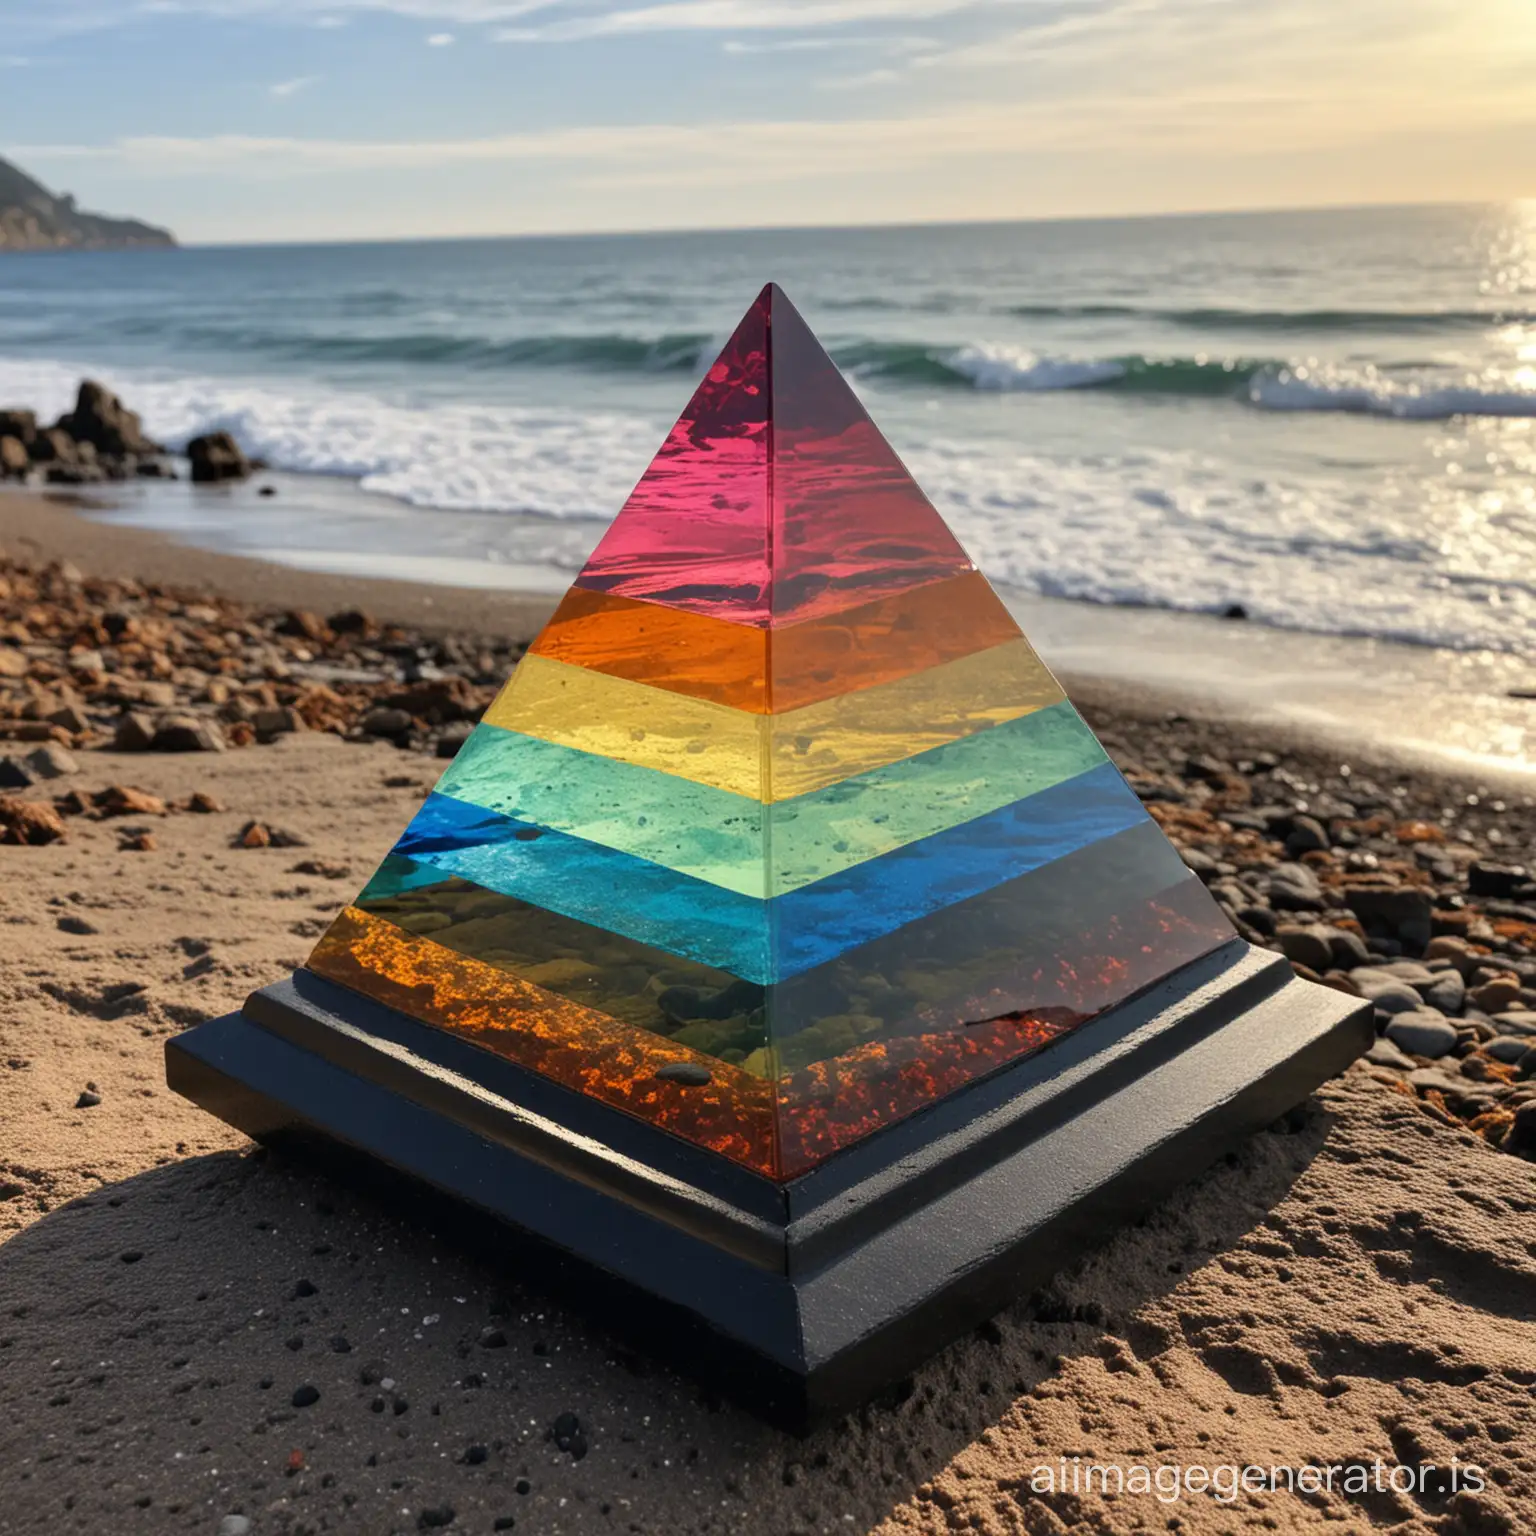 A large glass pyramid on a long black stone base, by the sea, which has been turned into 7 colors by the sunlight, like Newt's pyramid.